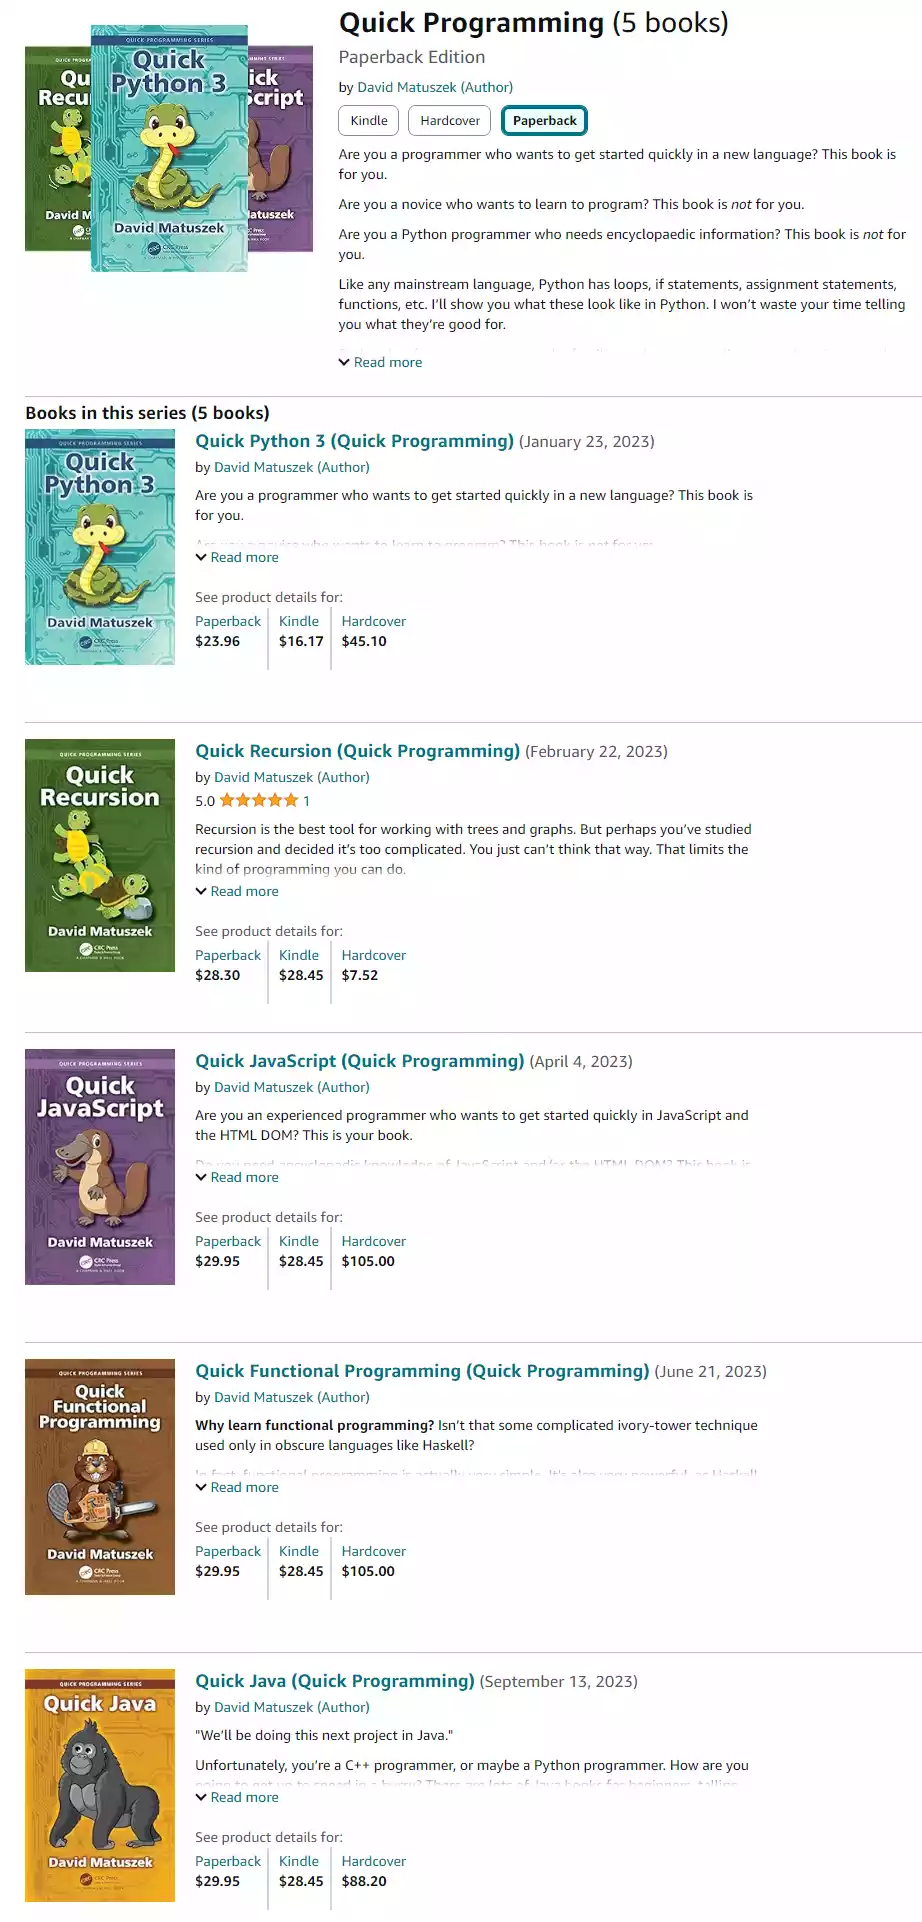 Quick Programming (5 book series) Paperback Edition